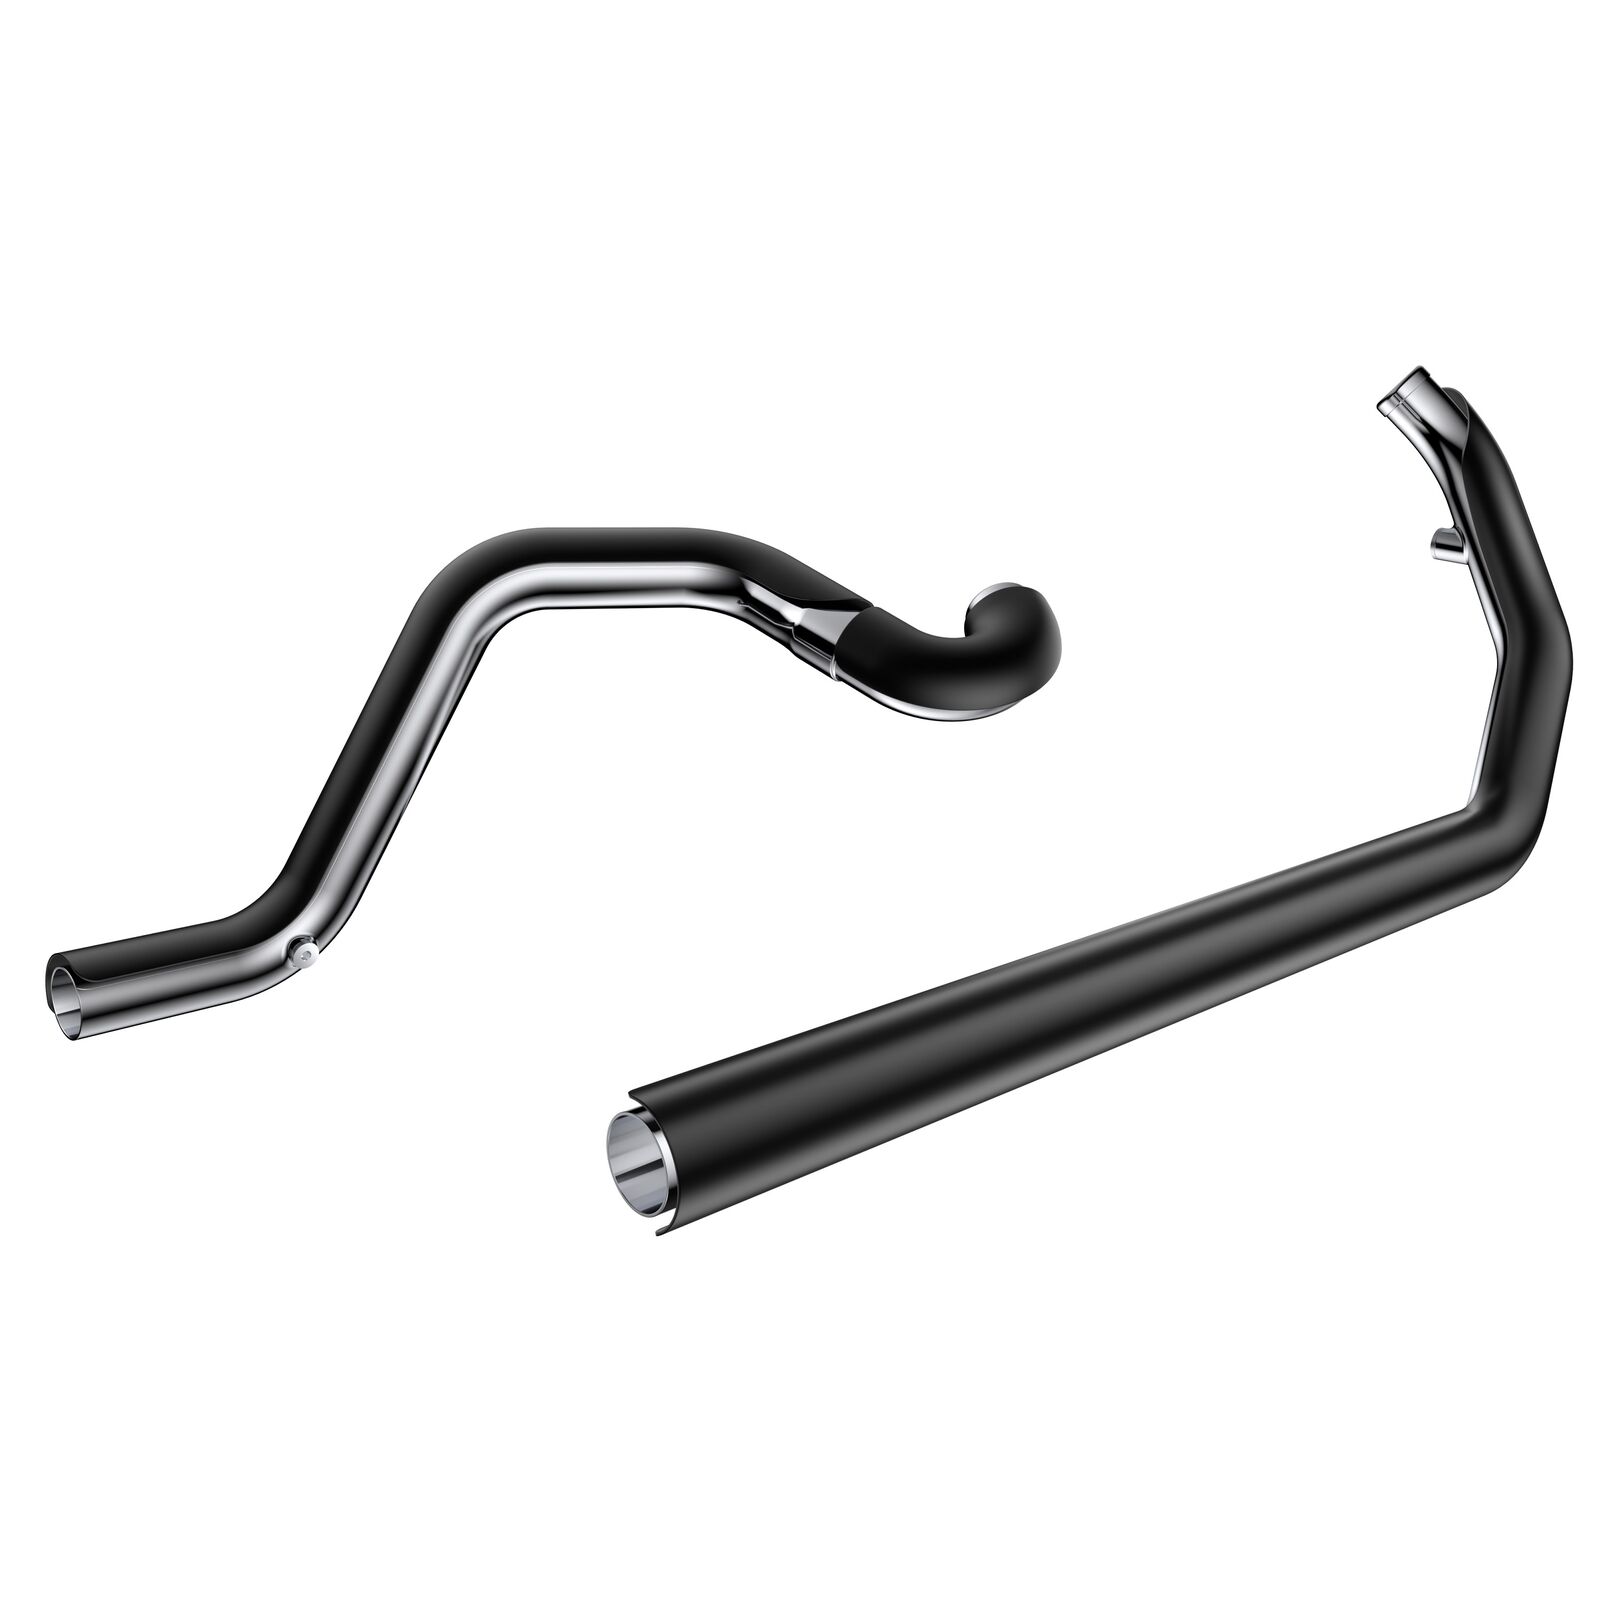 SHARKROAD Headers for True Dual Exhaust for Harley 95-16 Touring, Road Glide